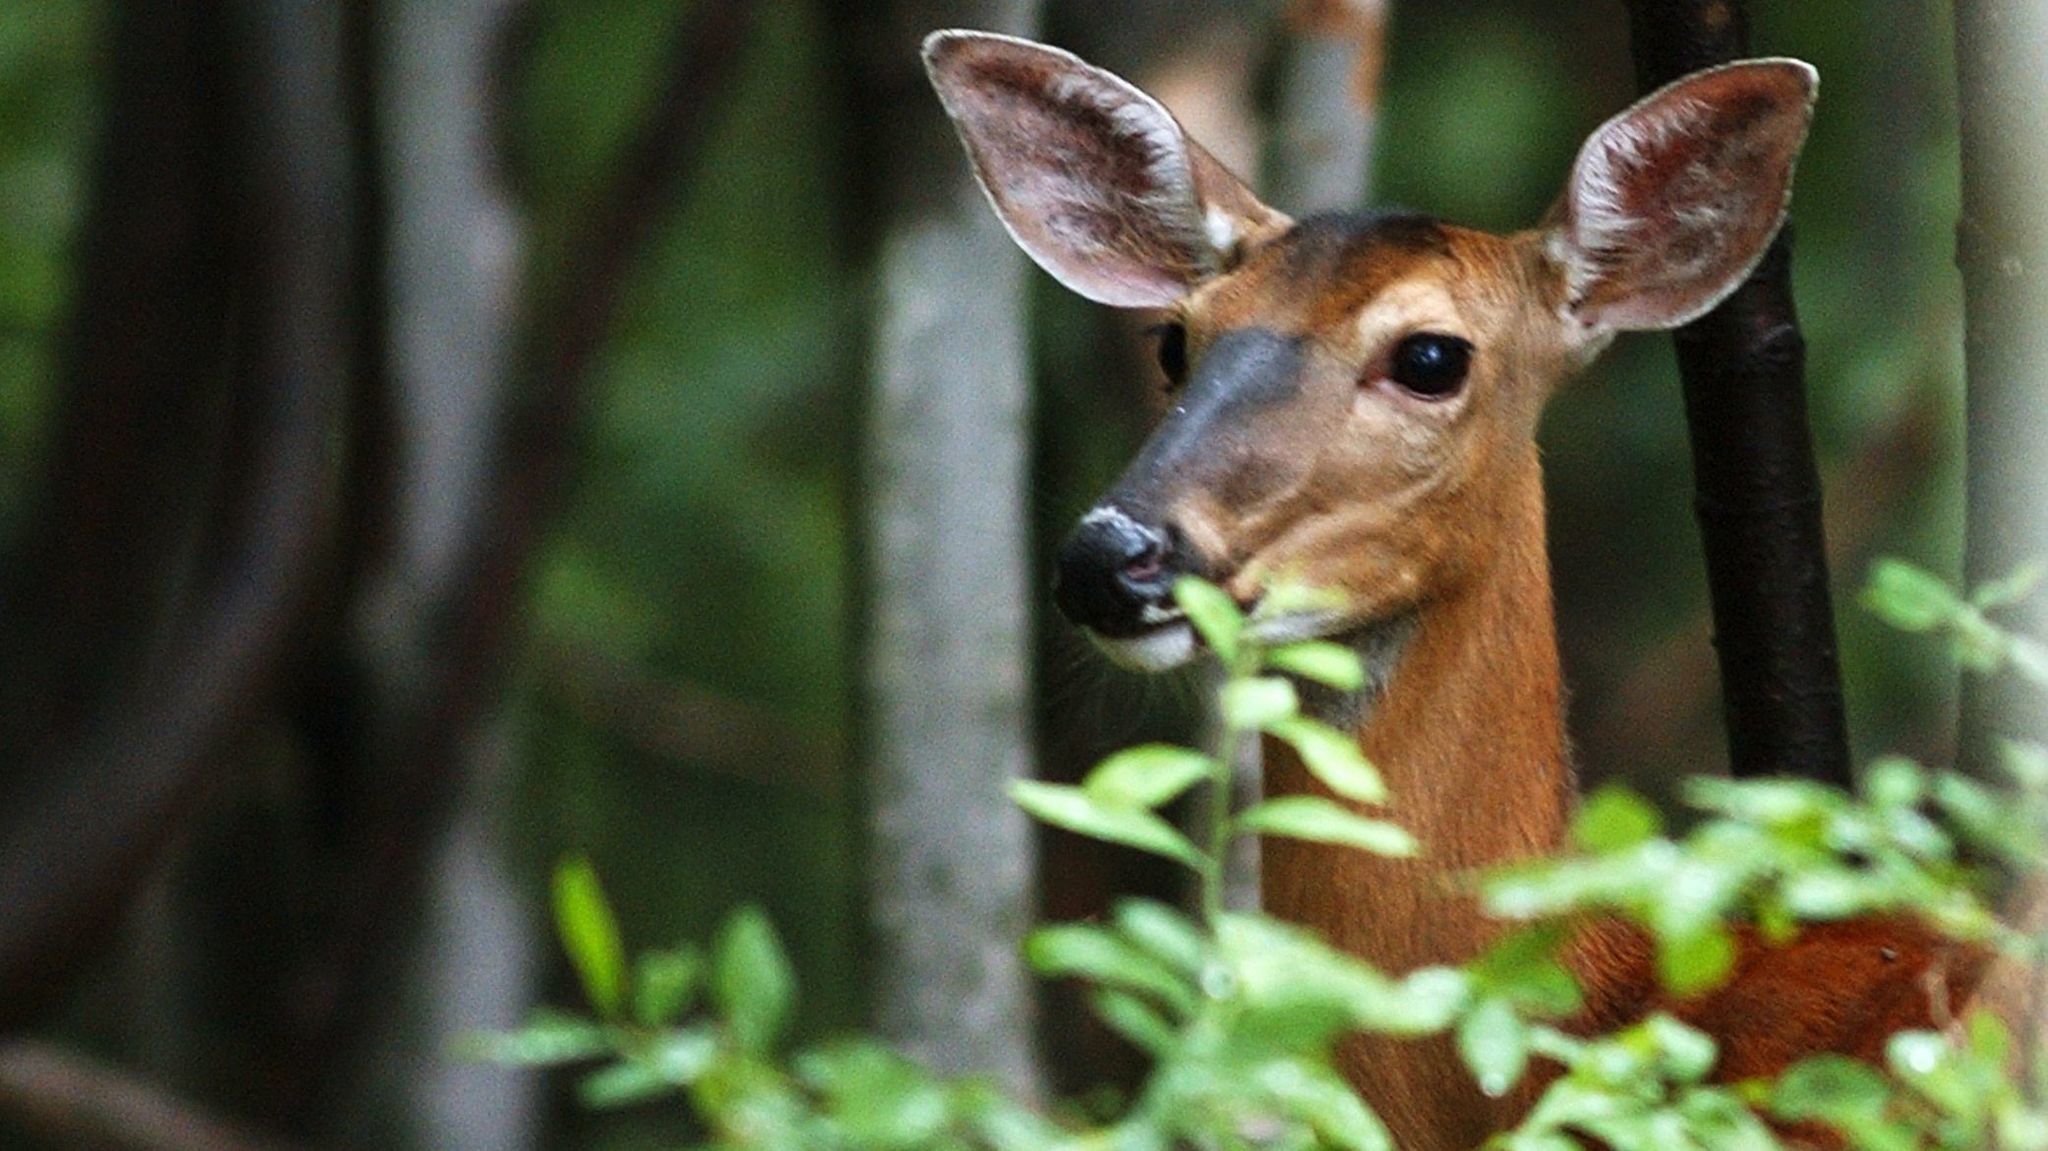 Gardening: Help! Deer are eating all of our plants - The Morning Call